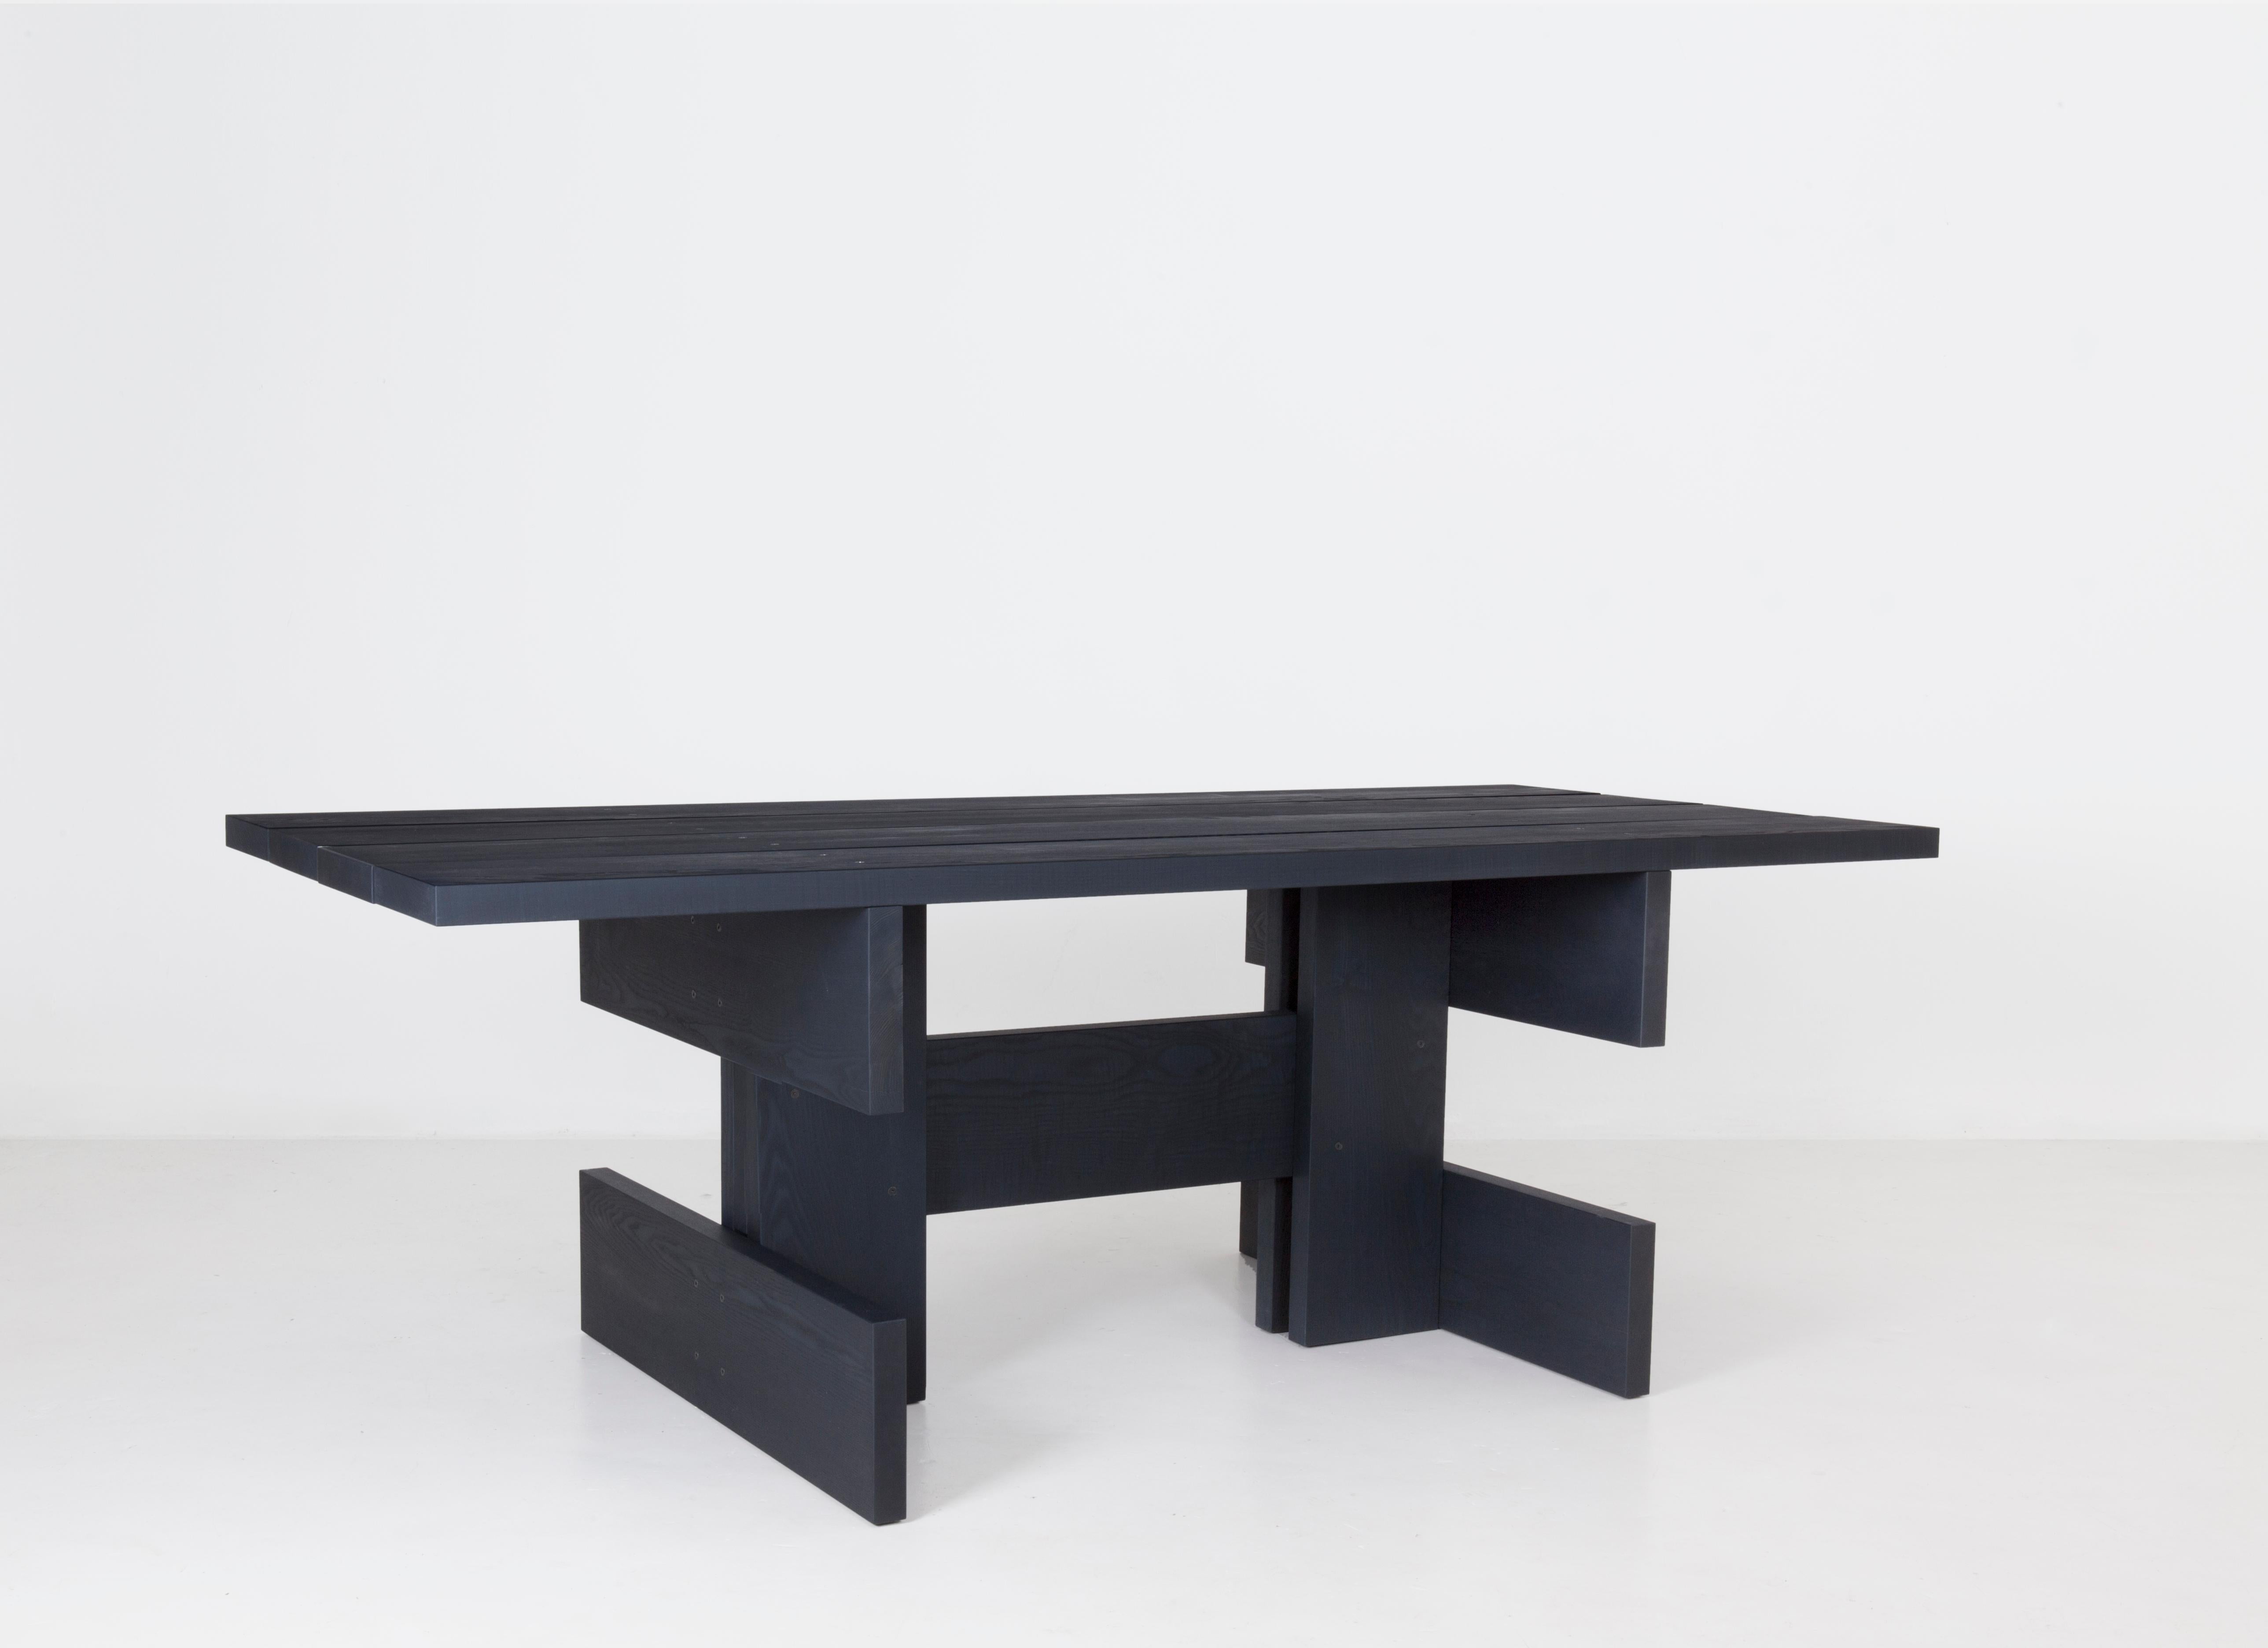 A bold wooden dining table. All its elements: base, legs, tabletop are based on the same plank profile and then linked. The constructed character gives Plank a rather architectural appeal. It sits like an anvil in the room and thanks to its